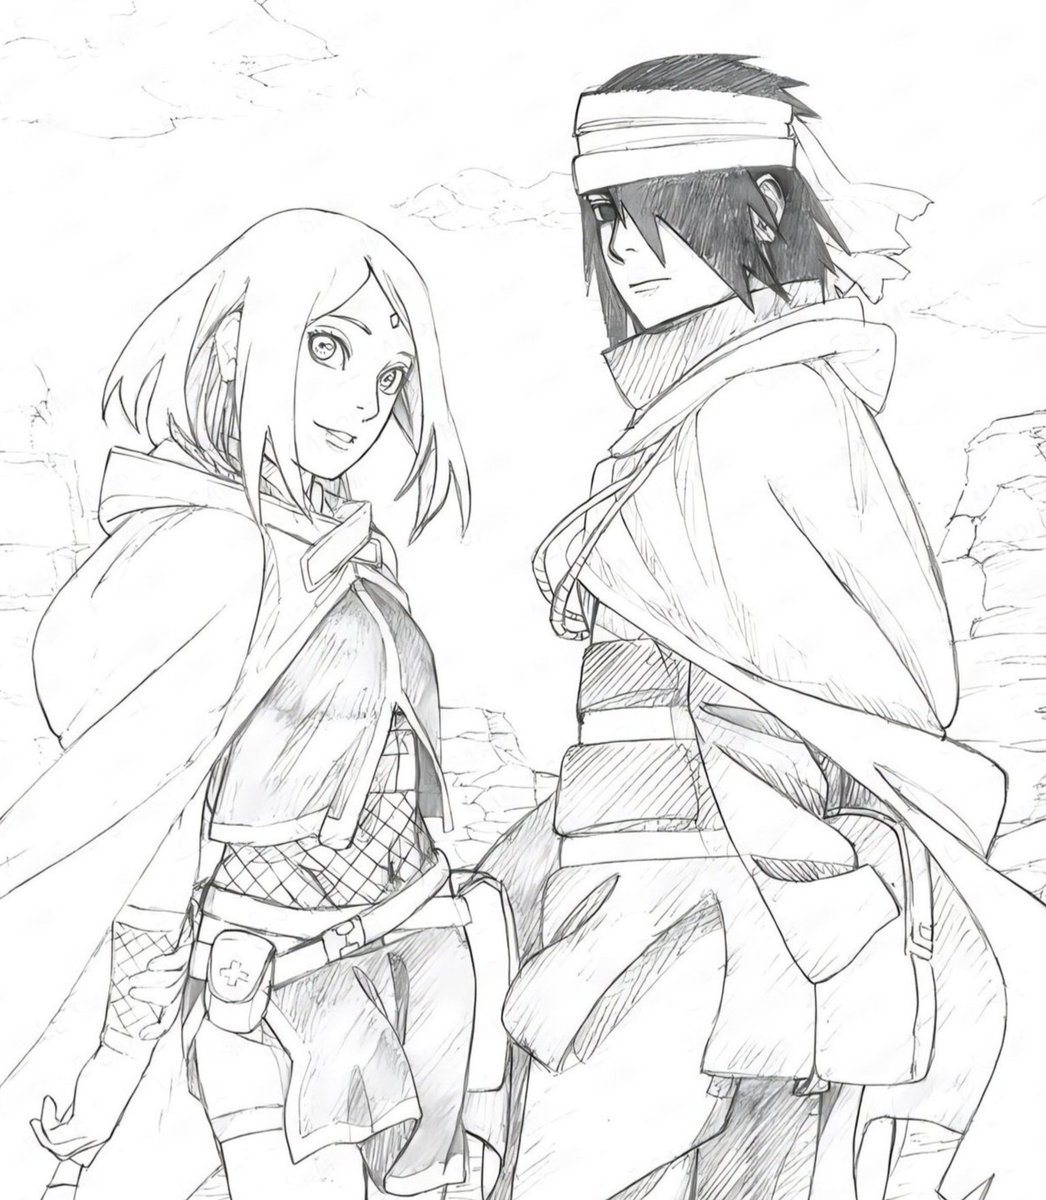 sometimes I wish that Sasuke and Sakura never came back to Konoha and just traveled in the woods together forever :(.